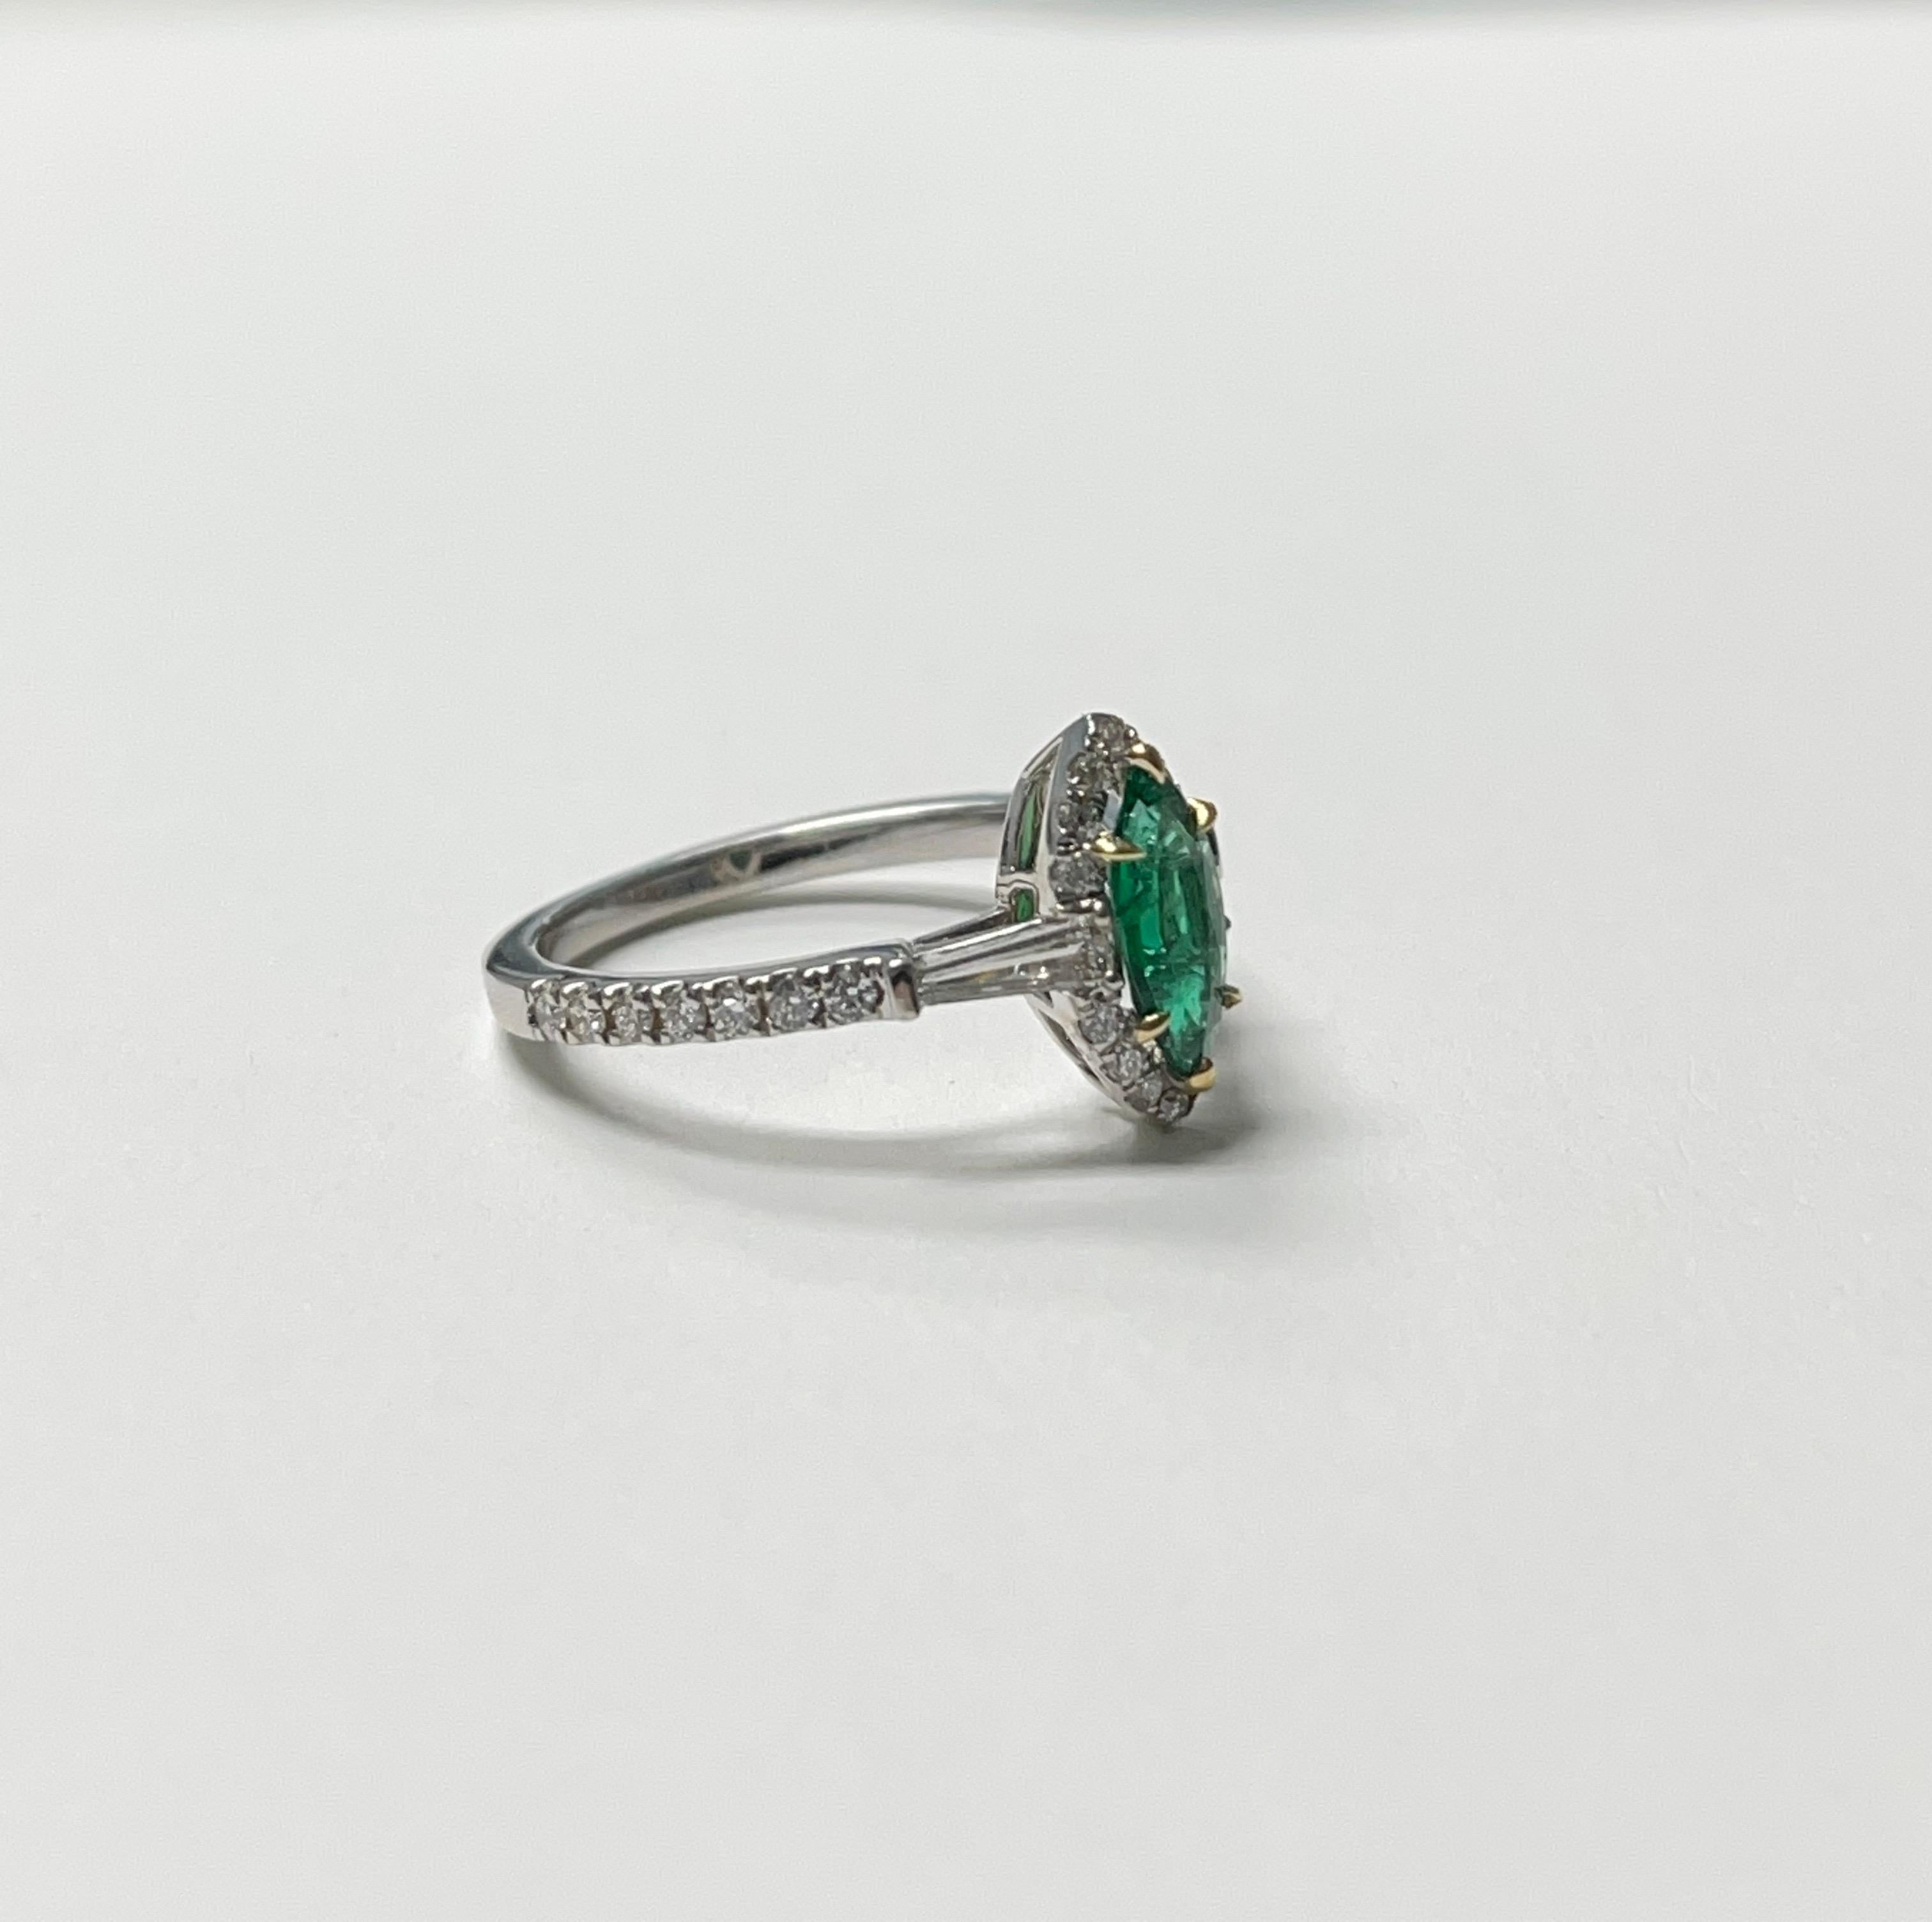 Emerald and diamond ring handmade in 18k white gold. 
The details are as follows :
Emerald weight : 0.50
Diamond weight : 0.60 carat 
Metal : 18k white gold 

